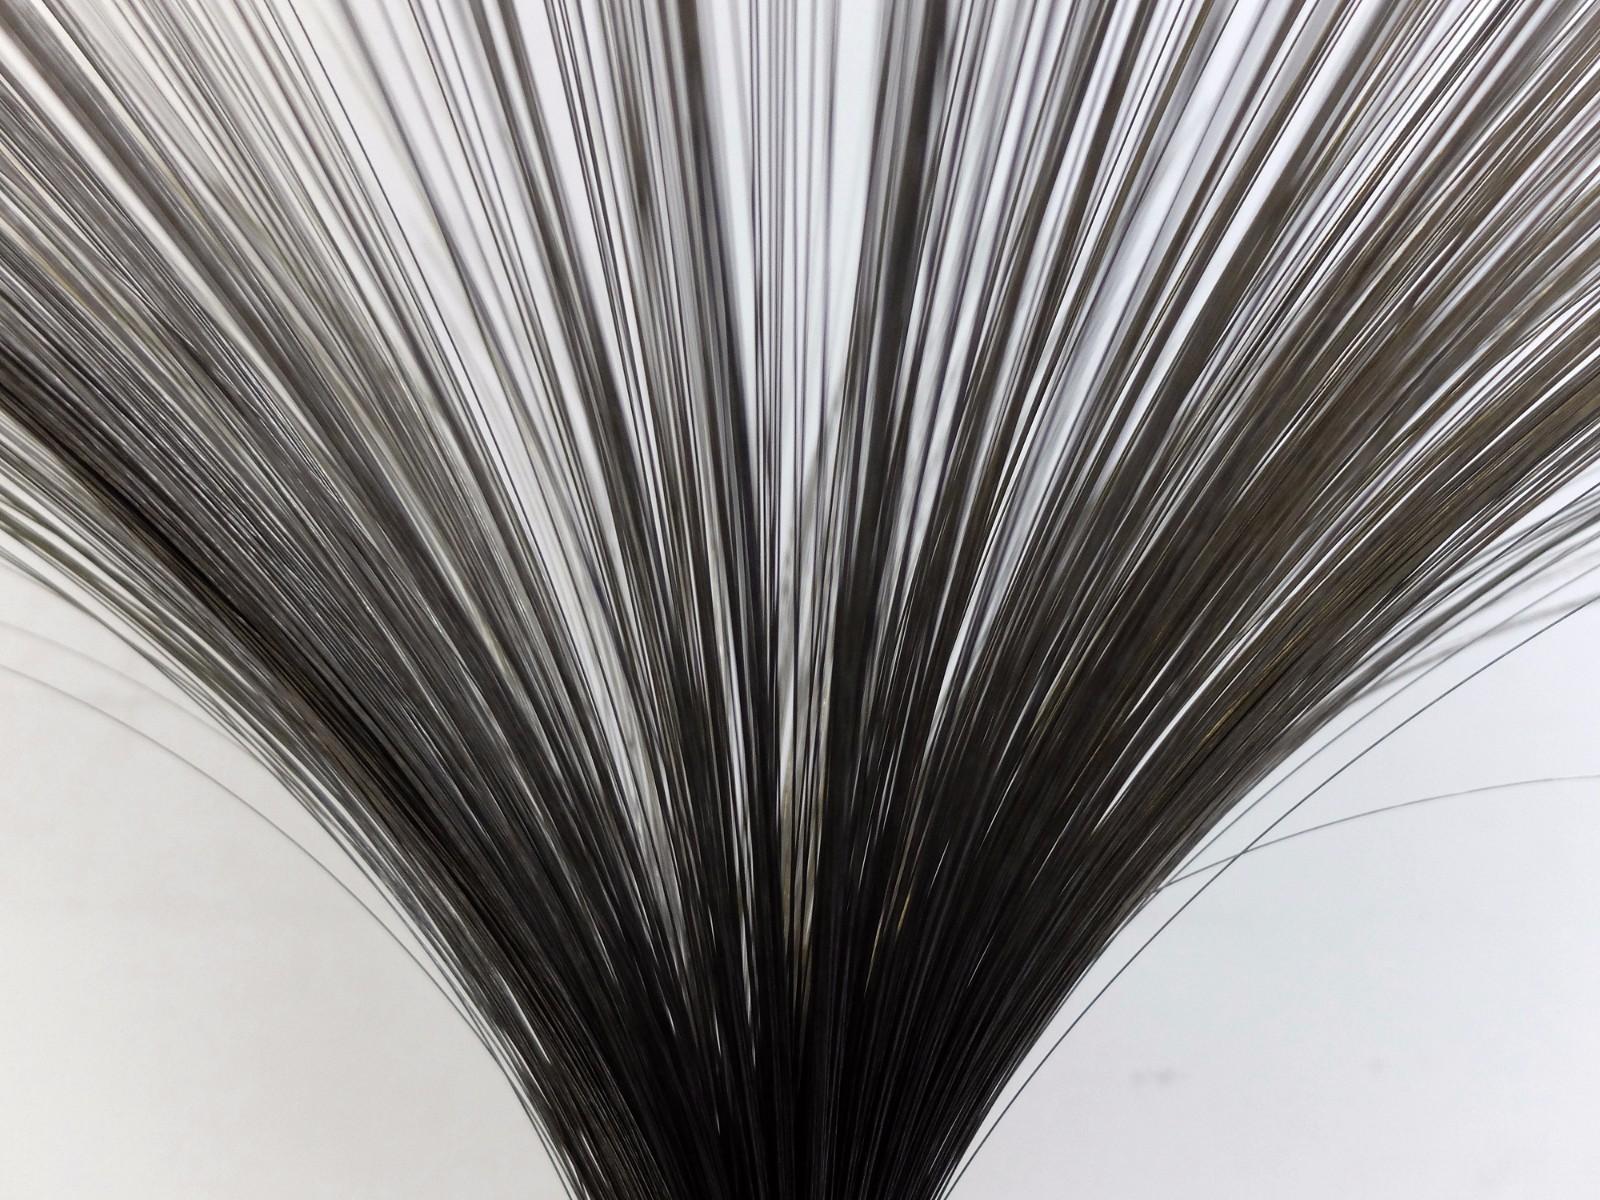 Mid-Century Modern Iron Sculpture in style of Harry Bertoia, circa 1960 For Sale